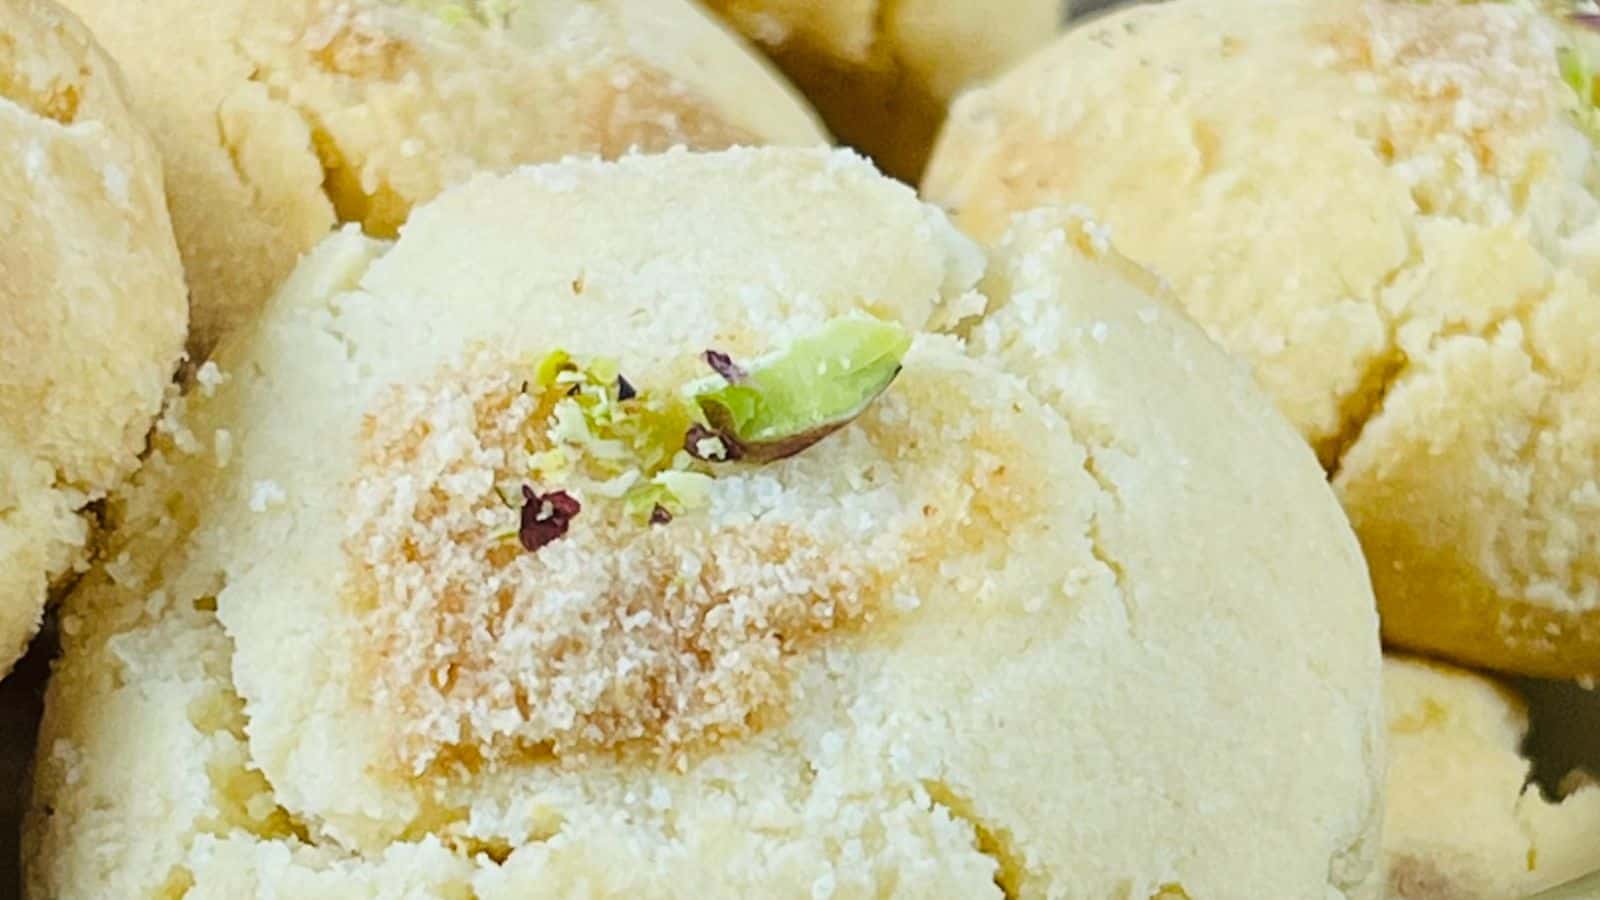 Close-up image of freshly baked cookies sprinkled with chopped pistachios and a hint of powdered sugar.